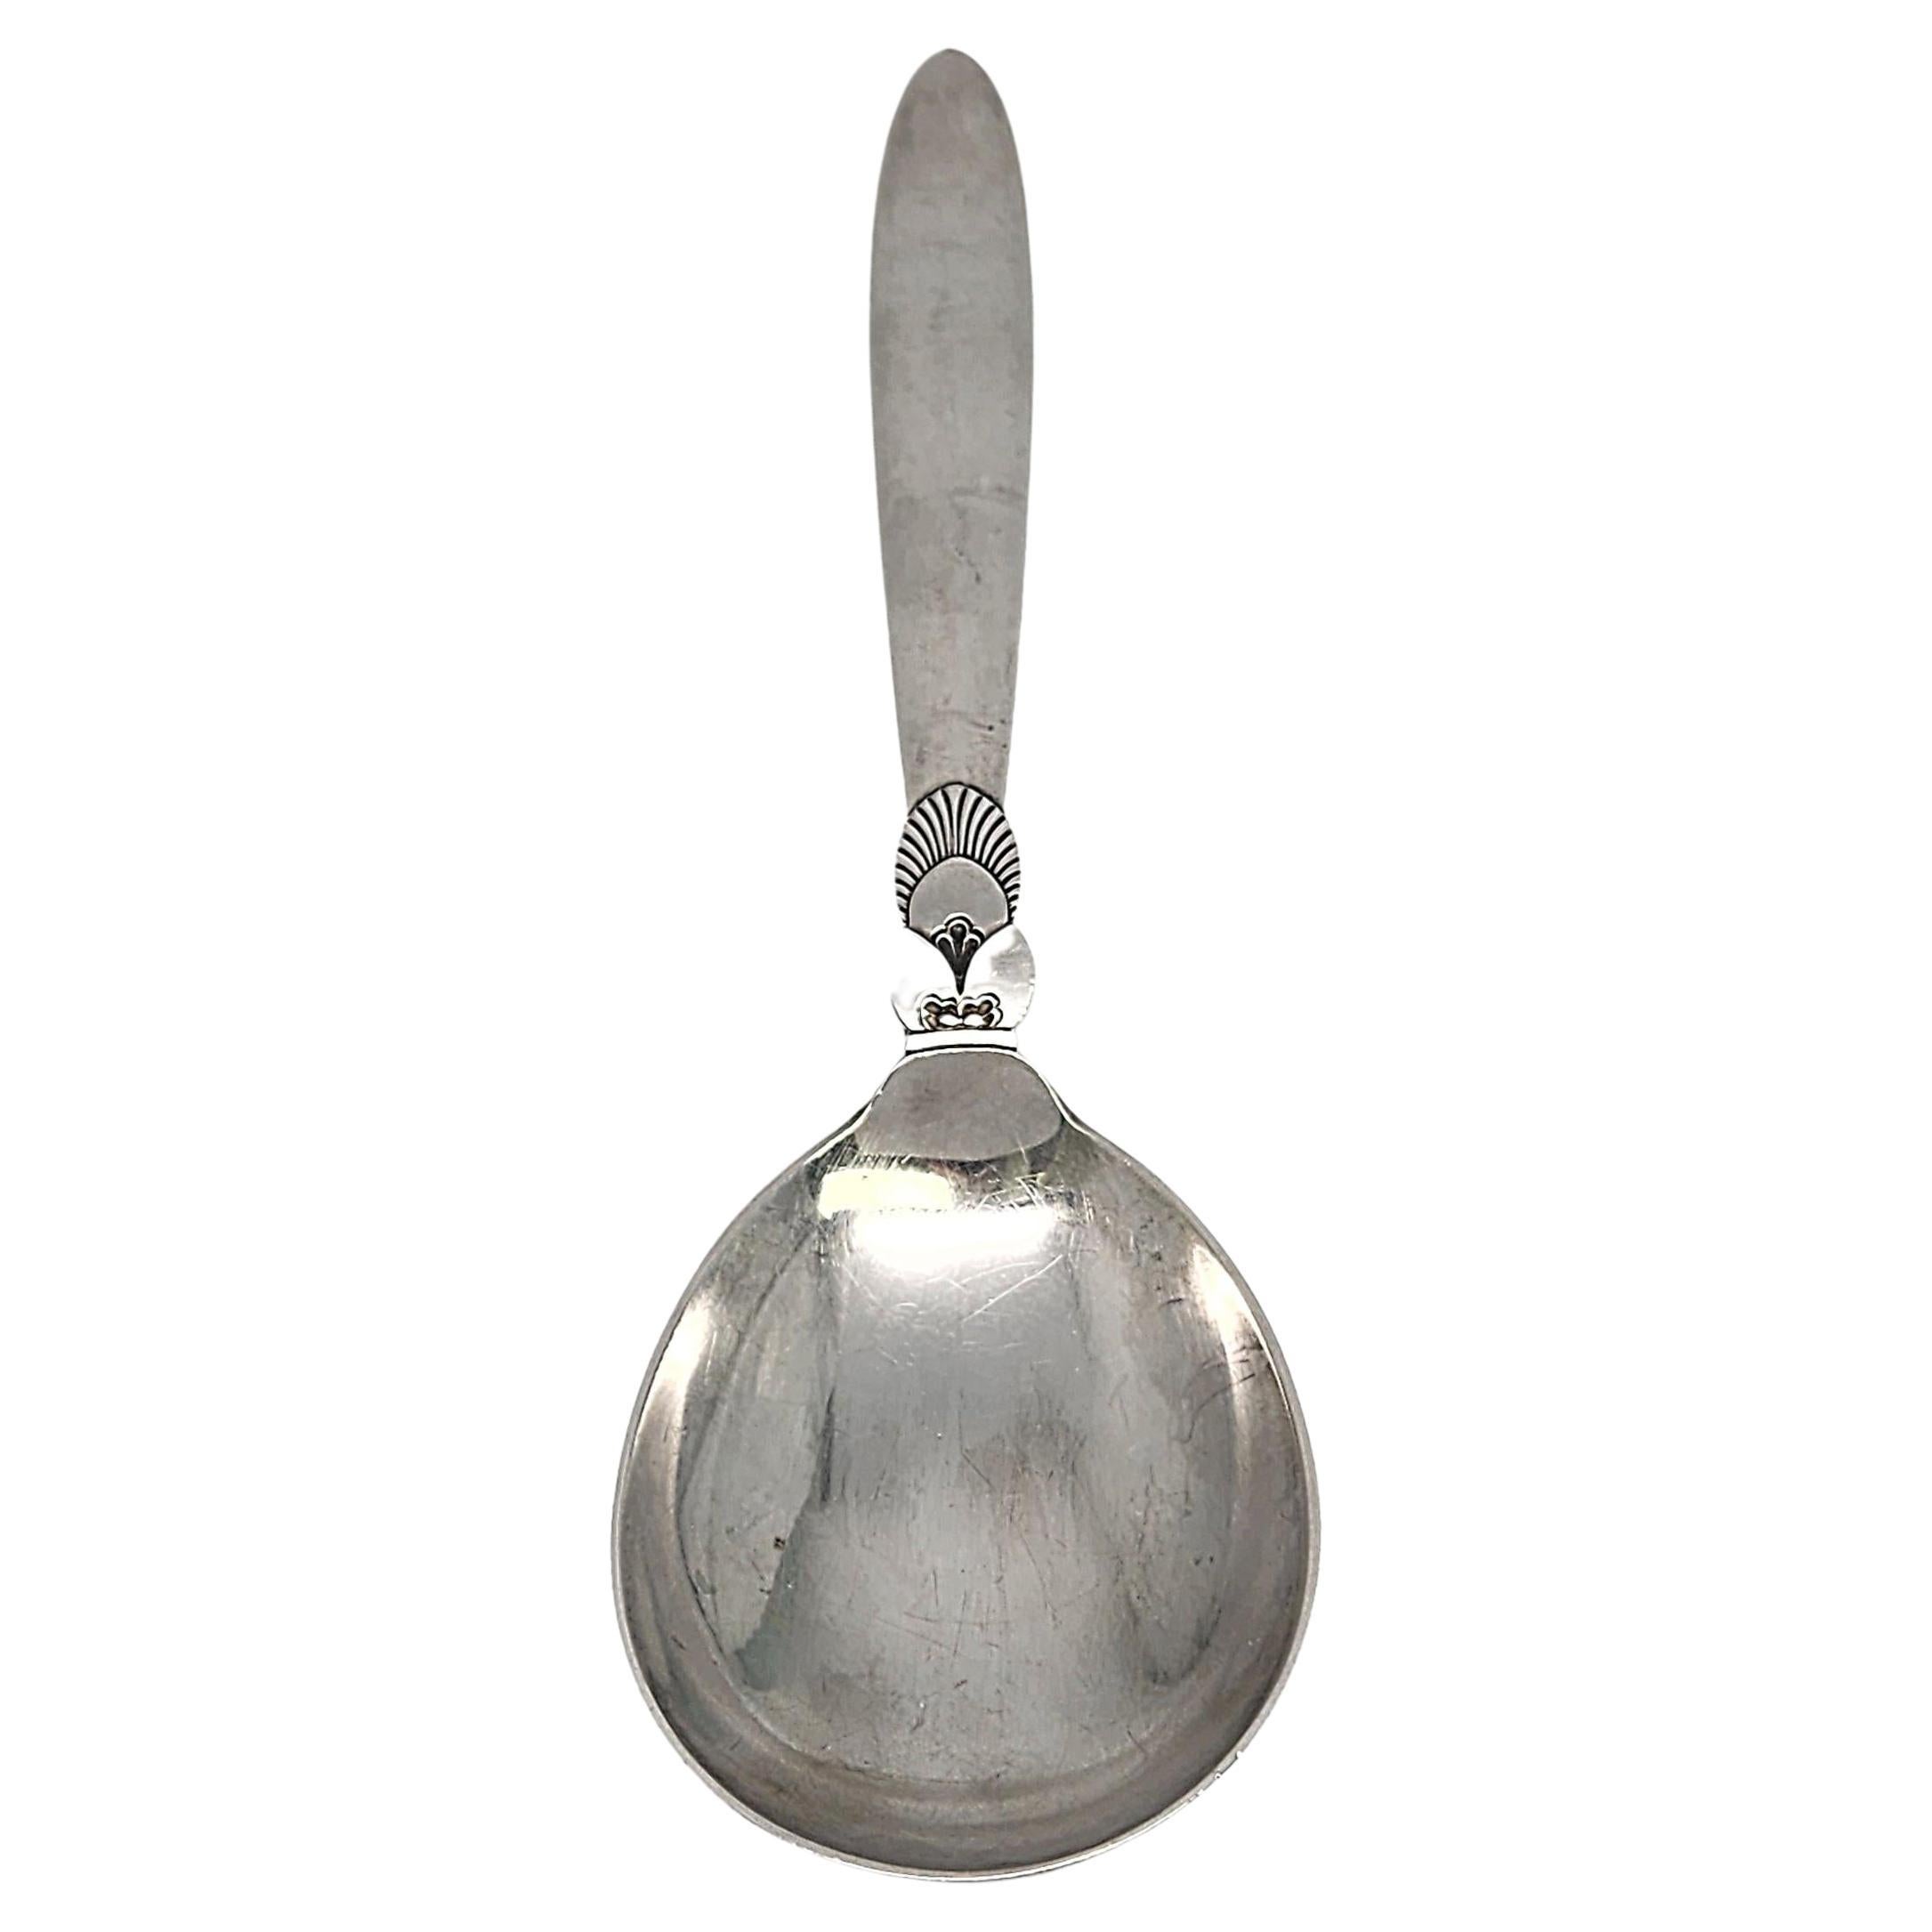 Georg Jensen Denmark Cactus Sterling Silver Small Serving Spoon 8" #16893 For Sale